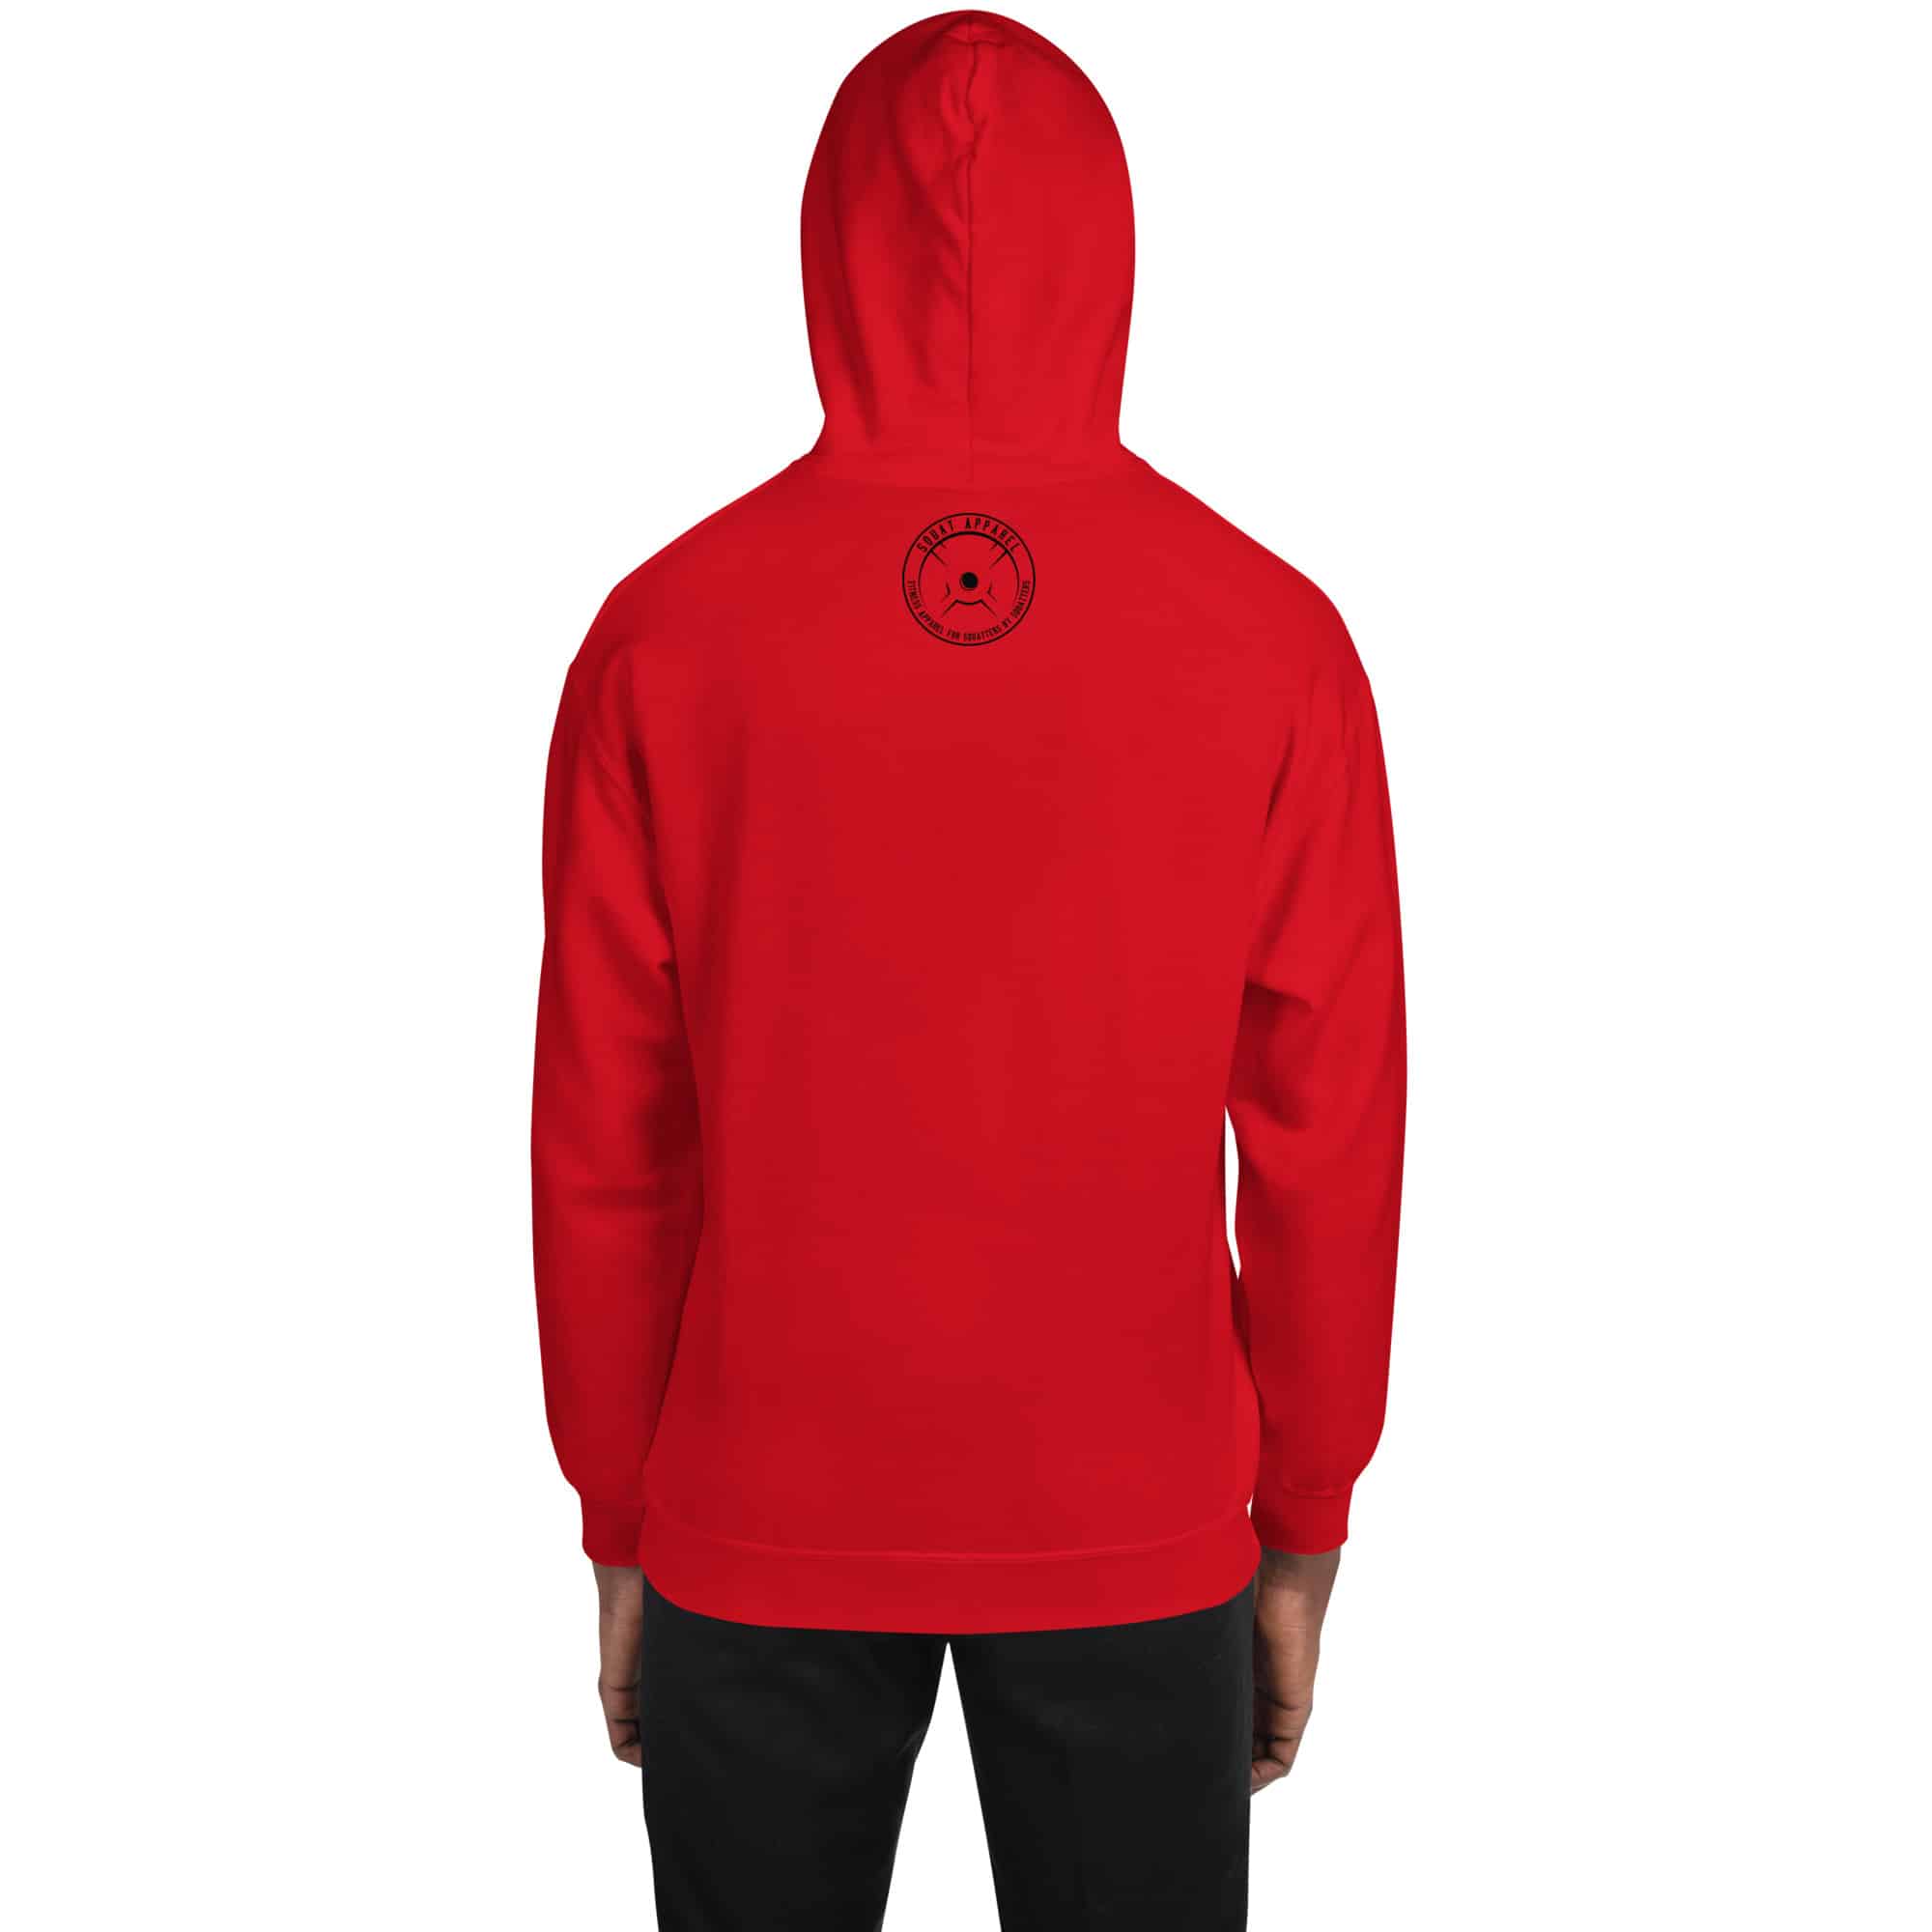 unisex heavy blend hoodie red back 641f956862ccf